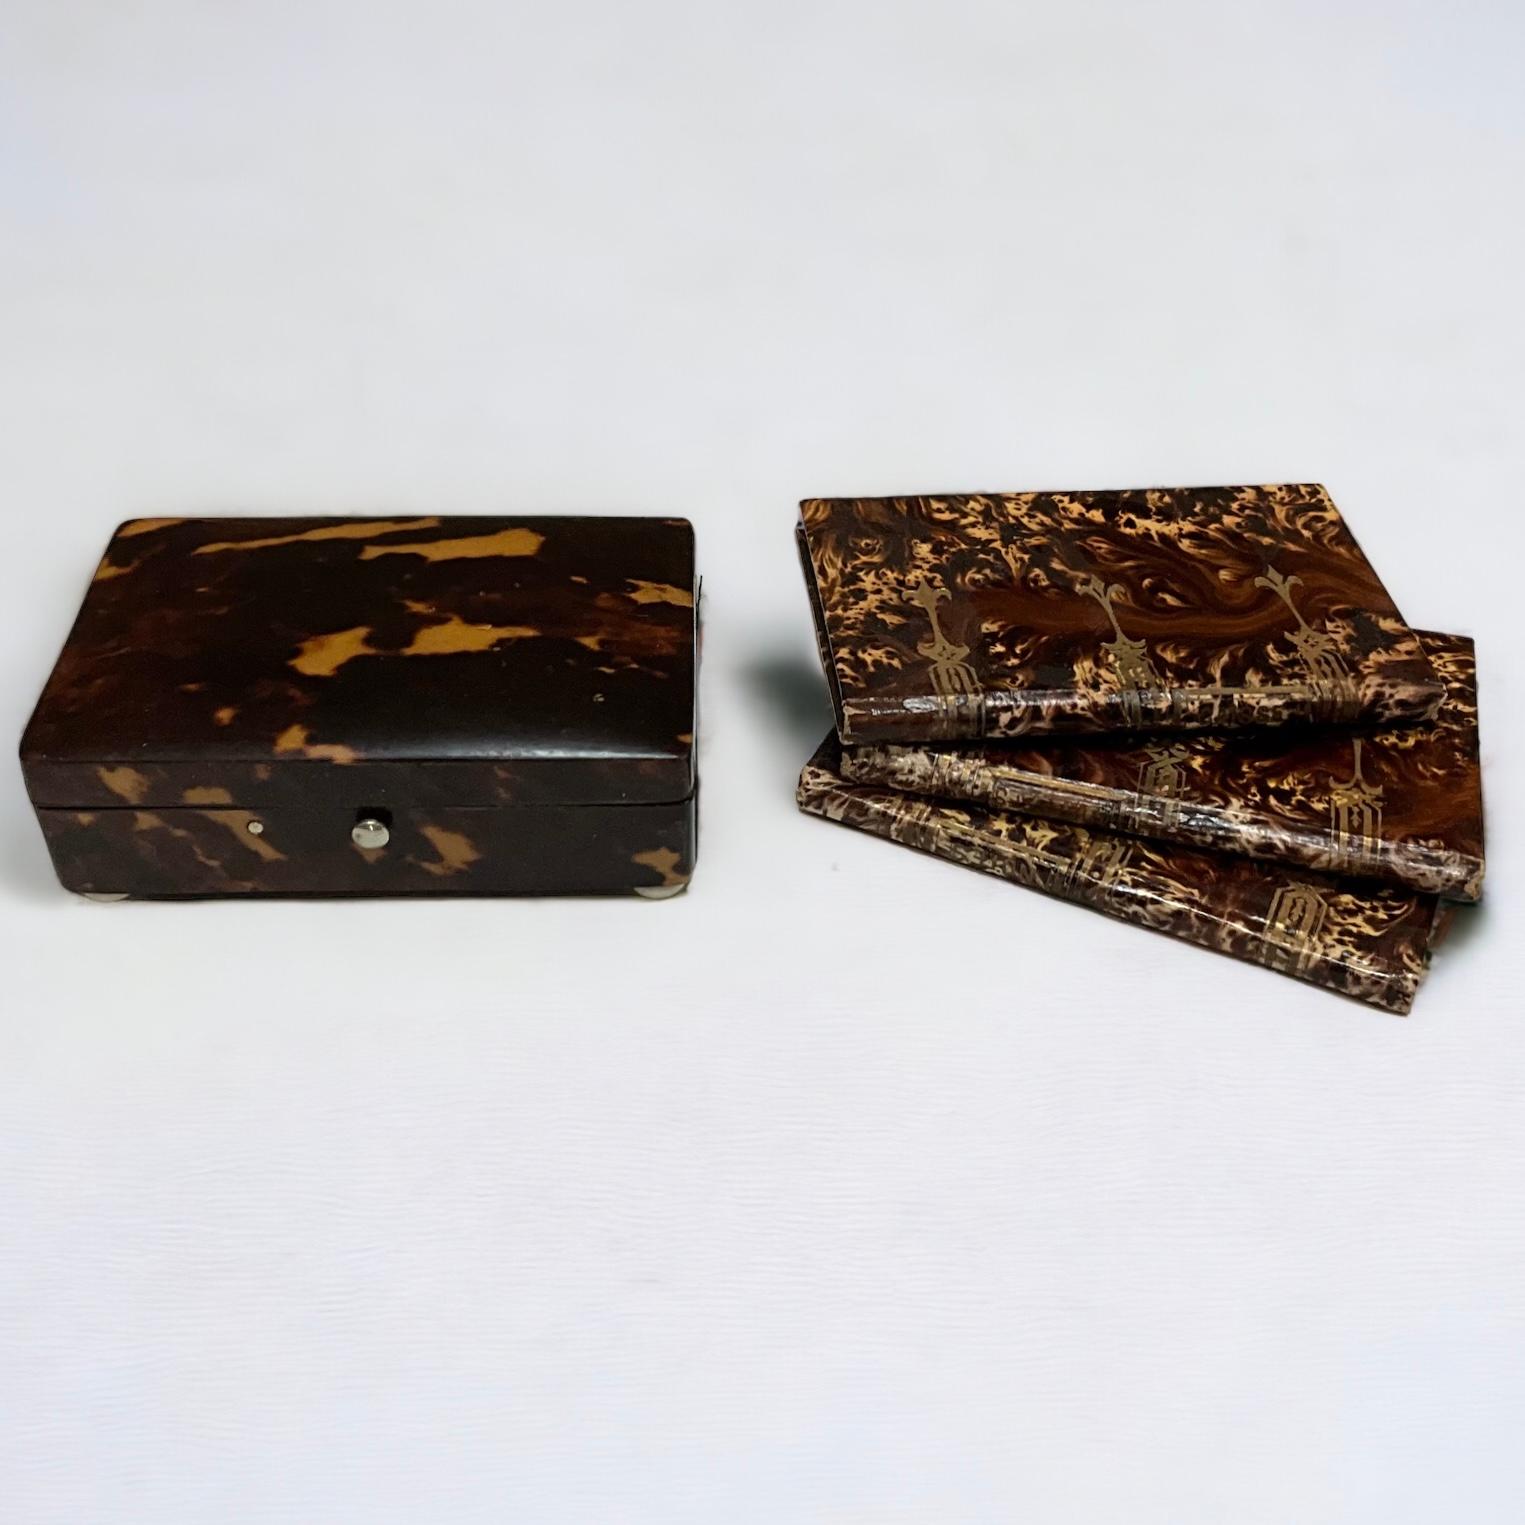 Holiday Gift Idea! This is a late 19th century English tortoise shell desk box paired with a set of three Italian faux tortoise leather notebooks. The notebooks have not been used. They most likely date to the 50s. The books are 3”L x 4.25”H.